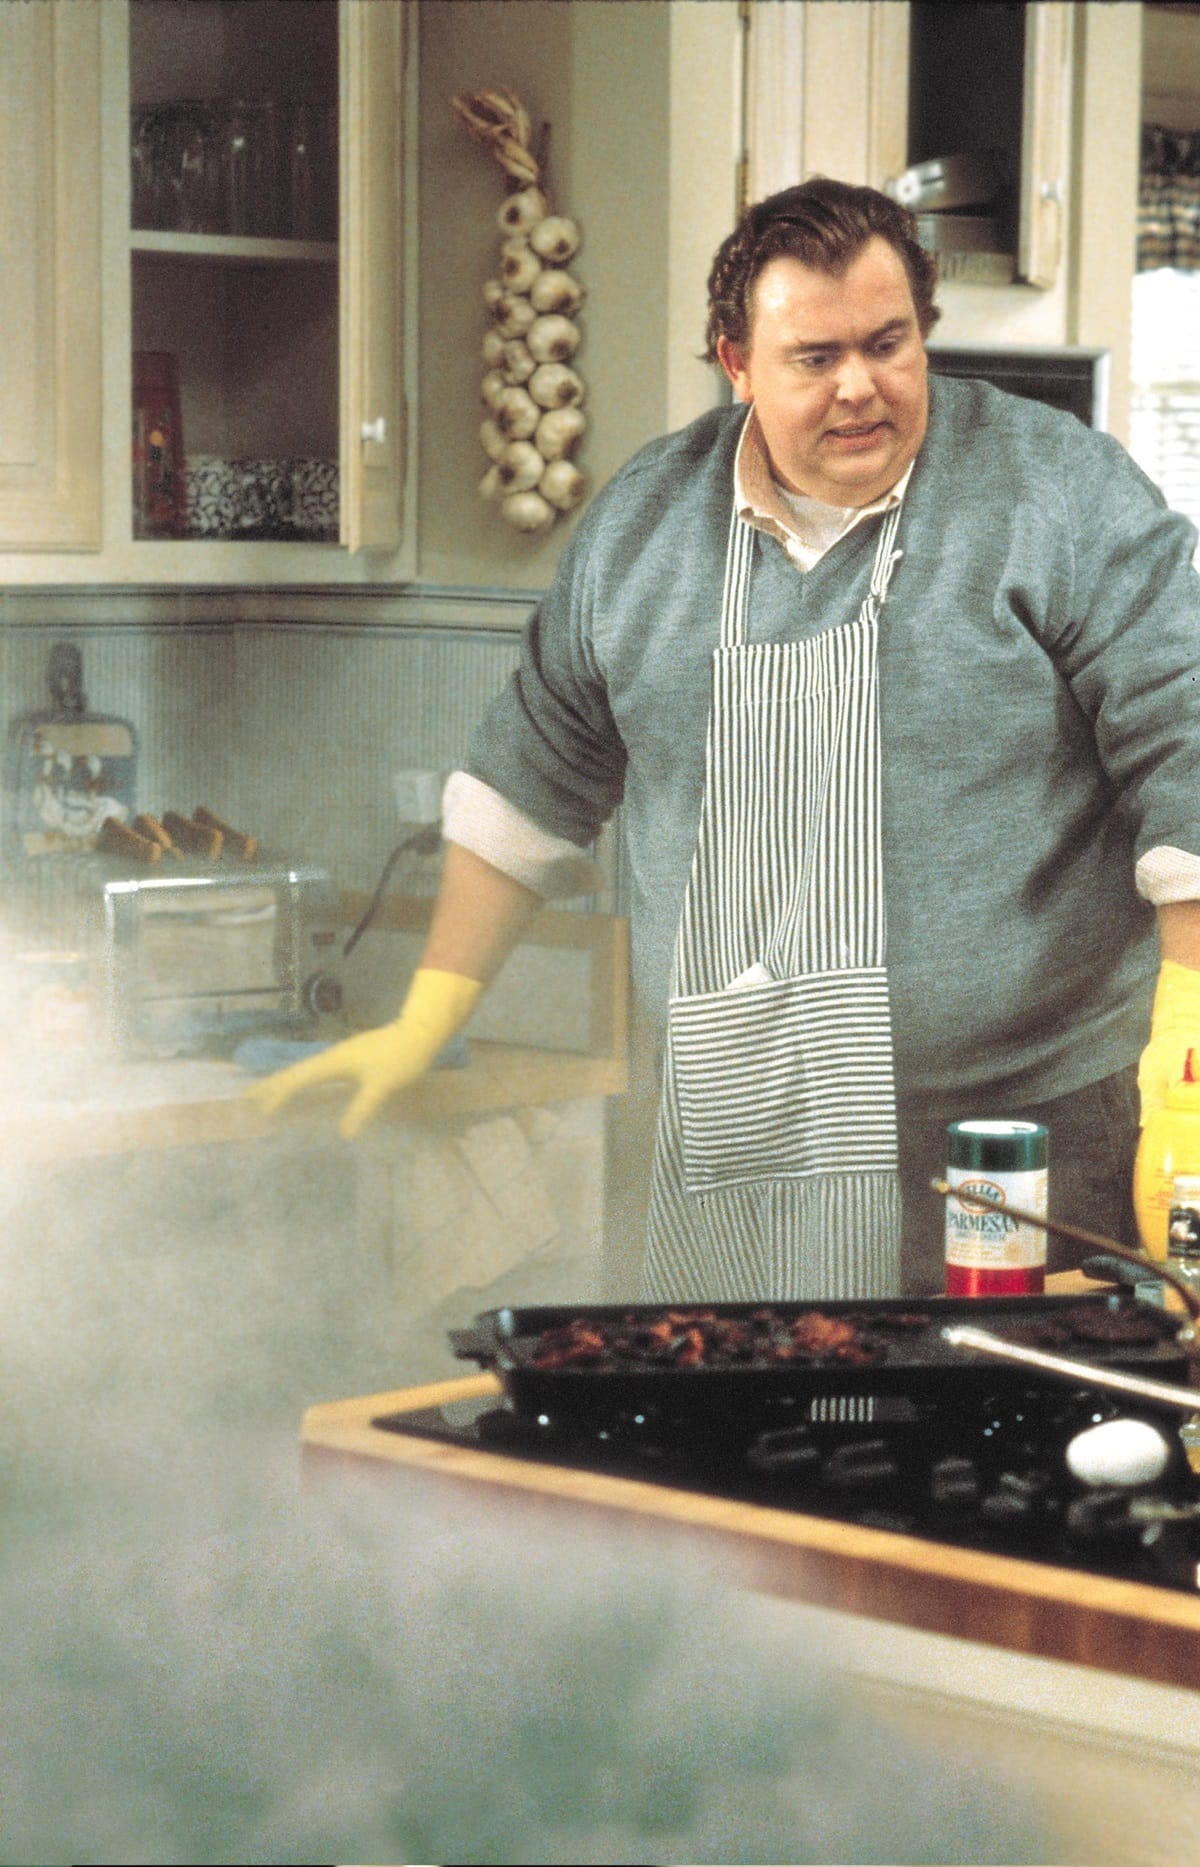 John Candy delivered a memorable performance as Buck Russell, the fun-loving and carefree bachelor who steps up to babysit his brother's kids in the beloved 1989 comedy film Uncle Buck